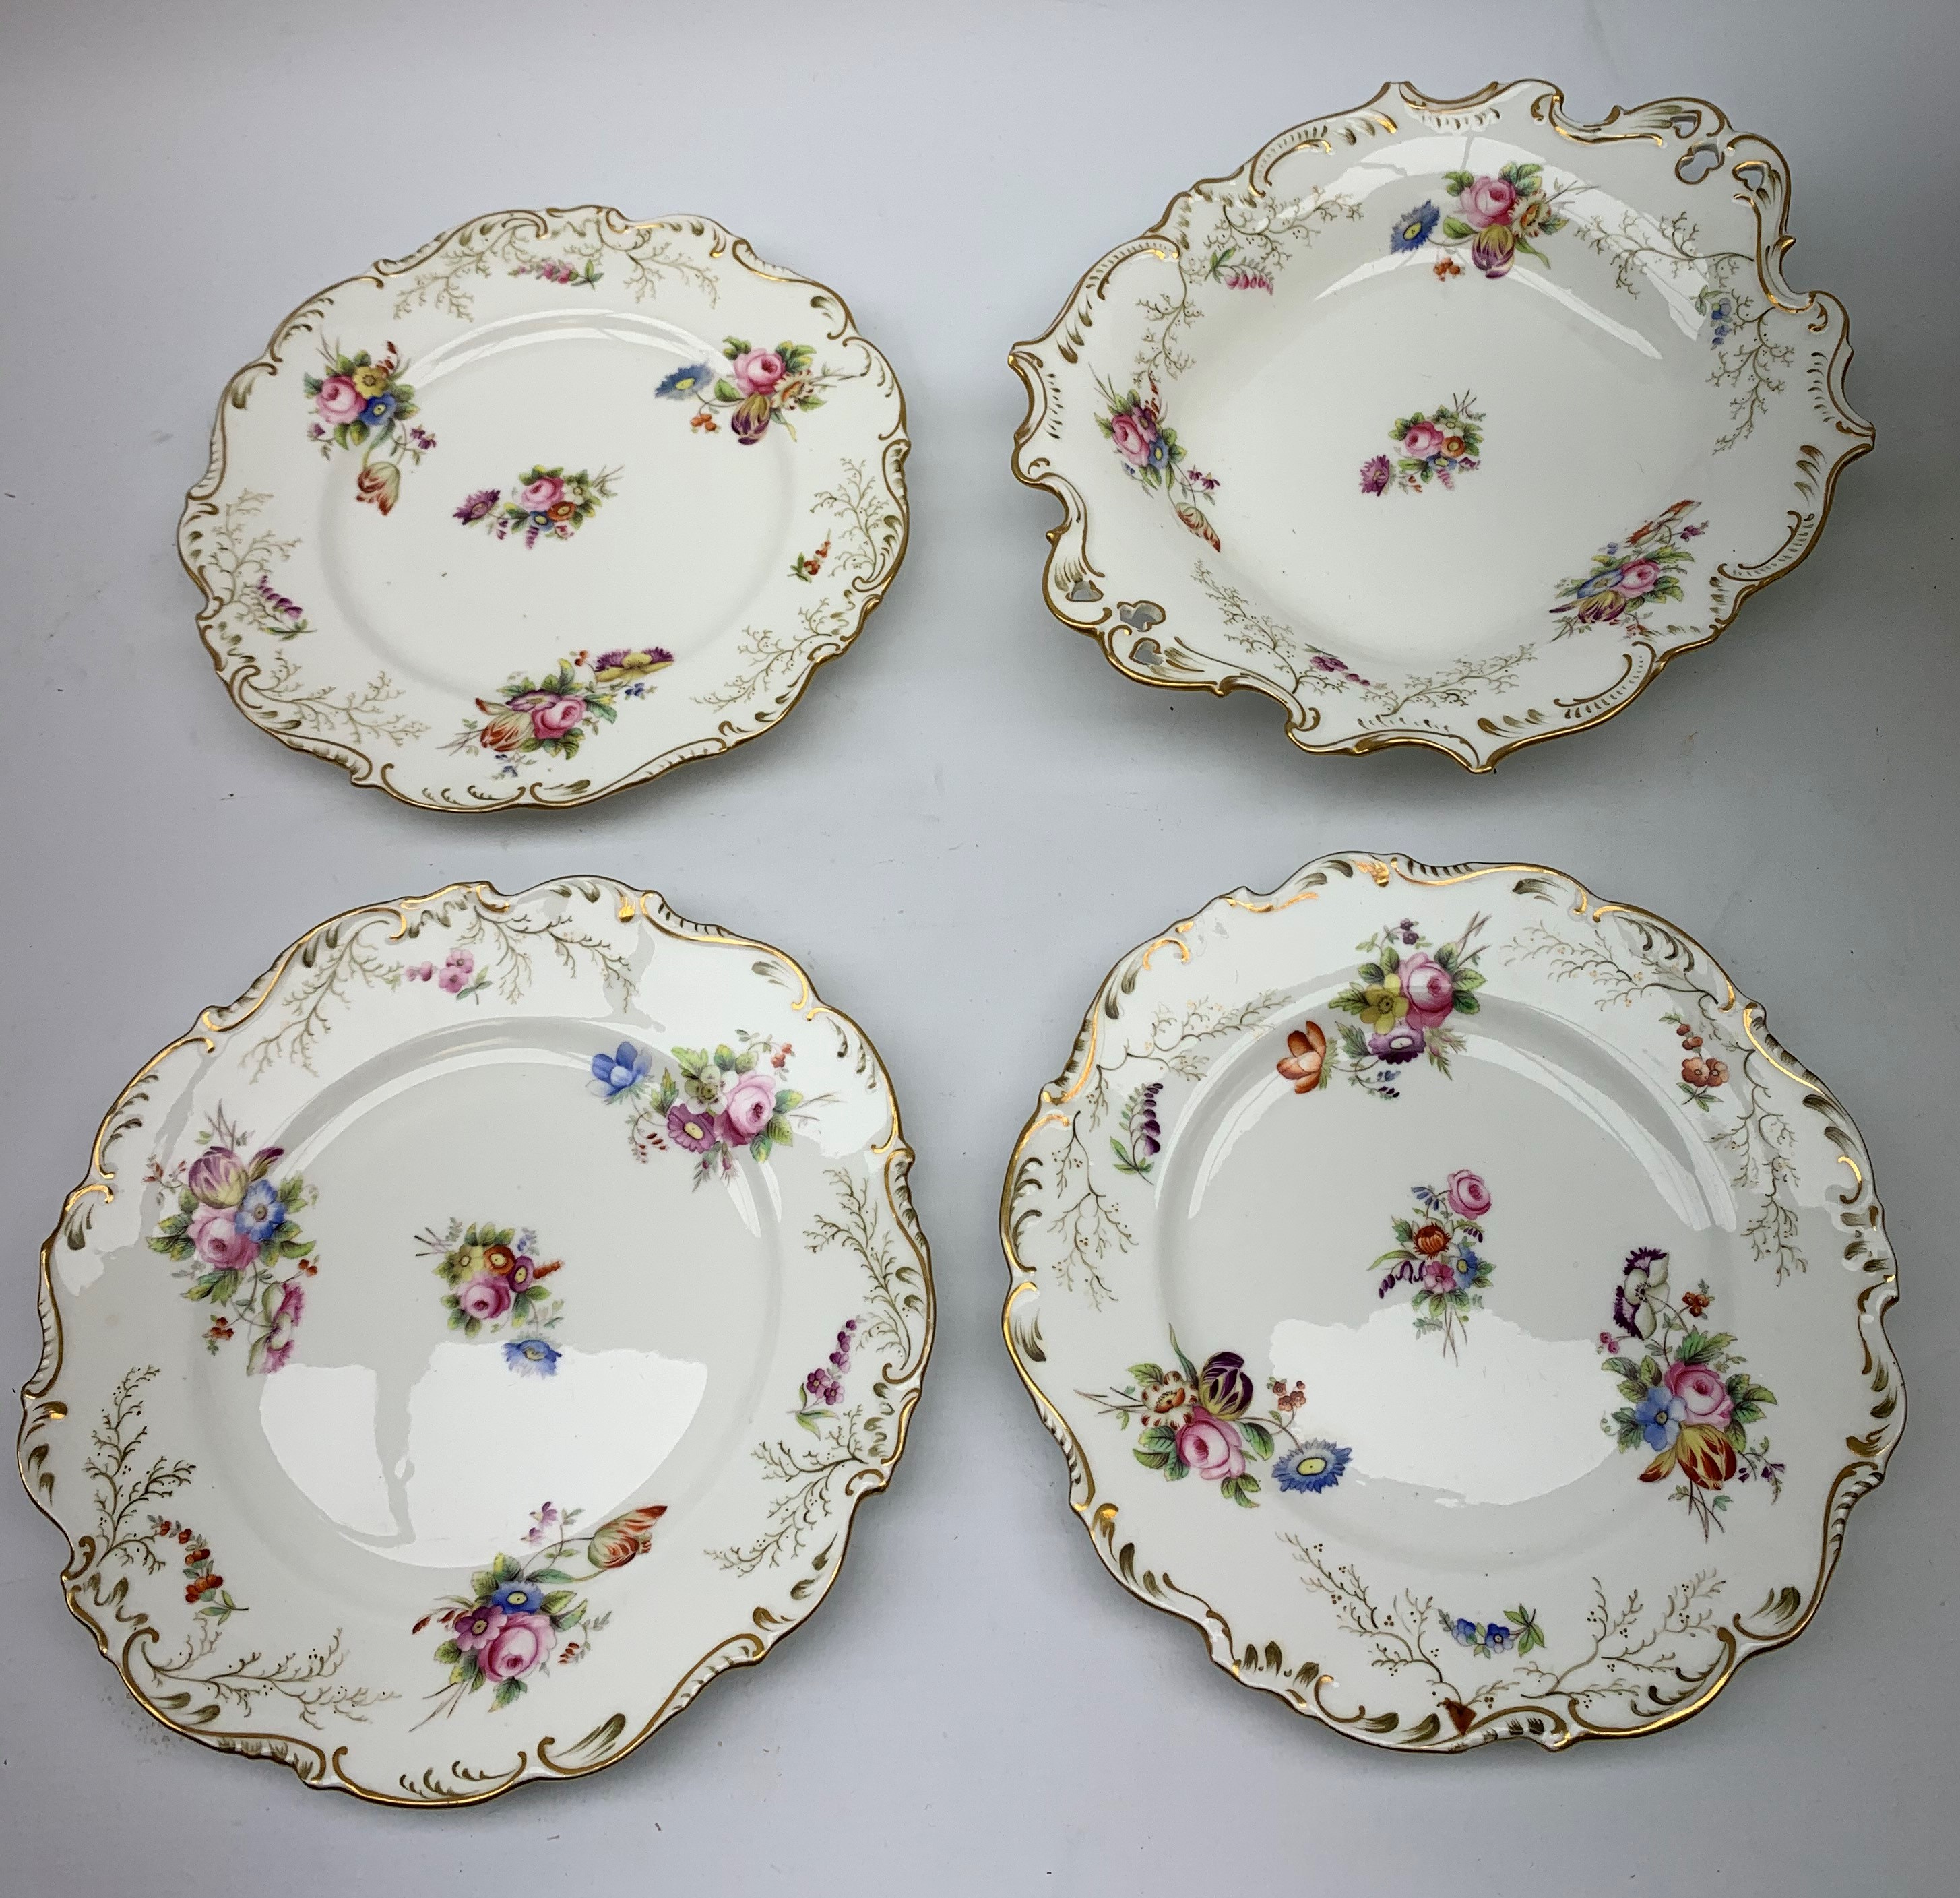 19th century dessert service, comprising large comport, two serving dishes, and six plates, each pai - Image 9 of 15